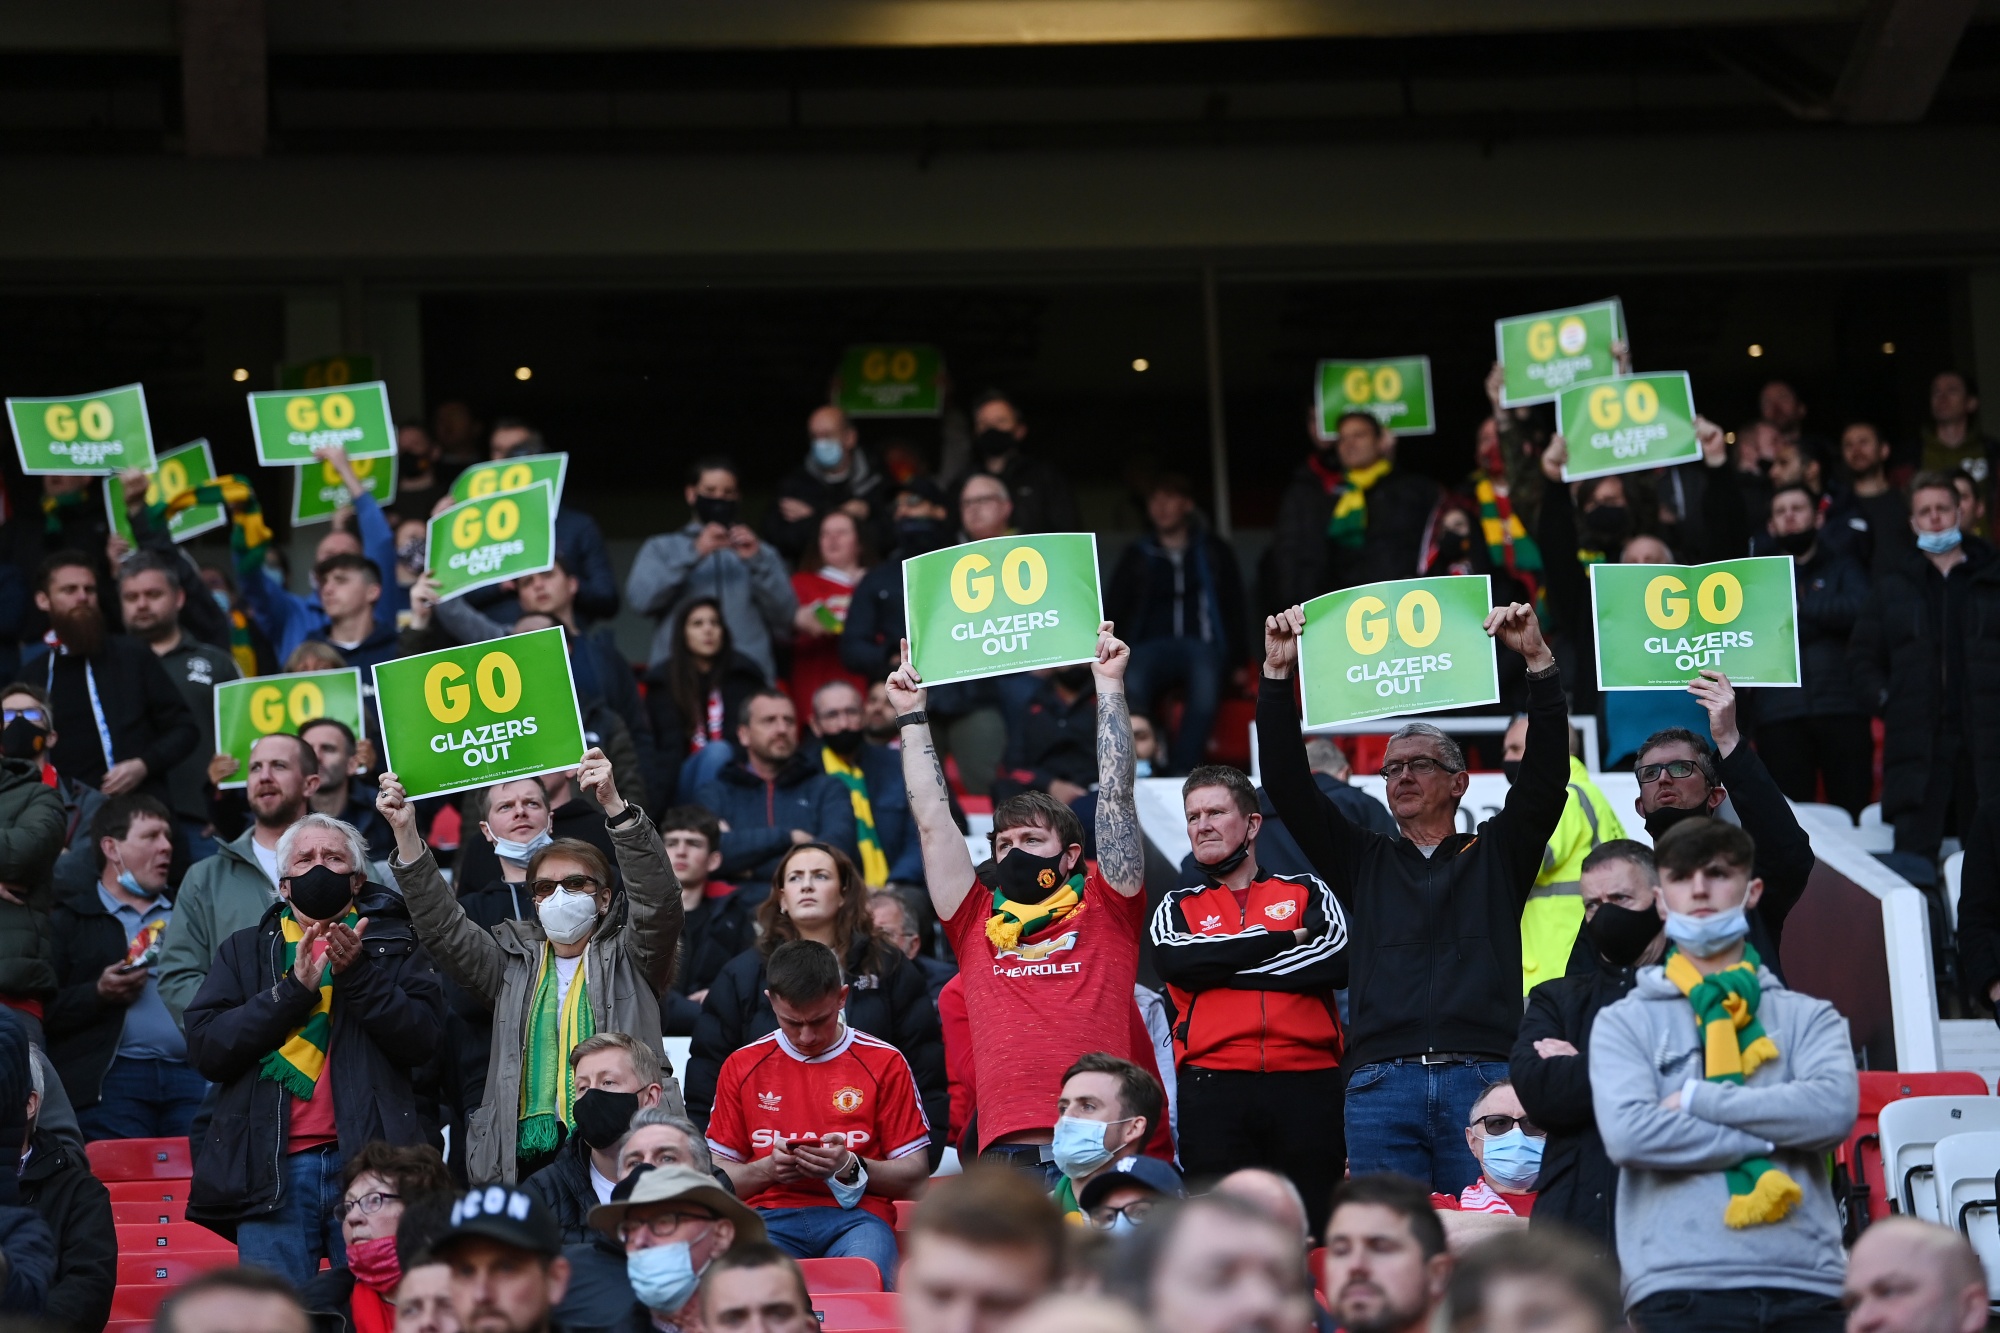 Fans of Manchester United hold up &quot;GO Glazers Out&quot; signs during the Premier League match between Manchester United and Fulham at Old Trafford, in Manchester, U.K.,&nbsp;on May 18.